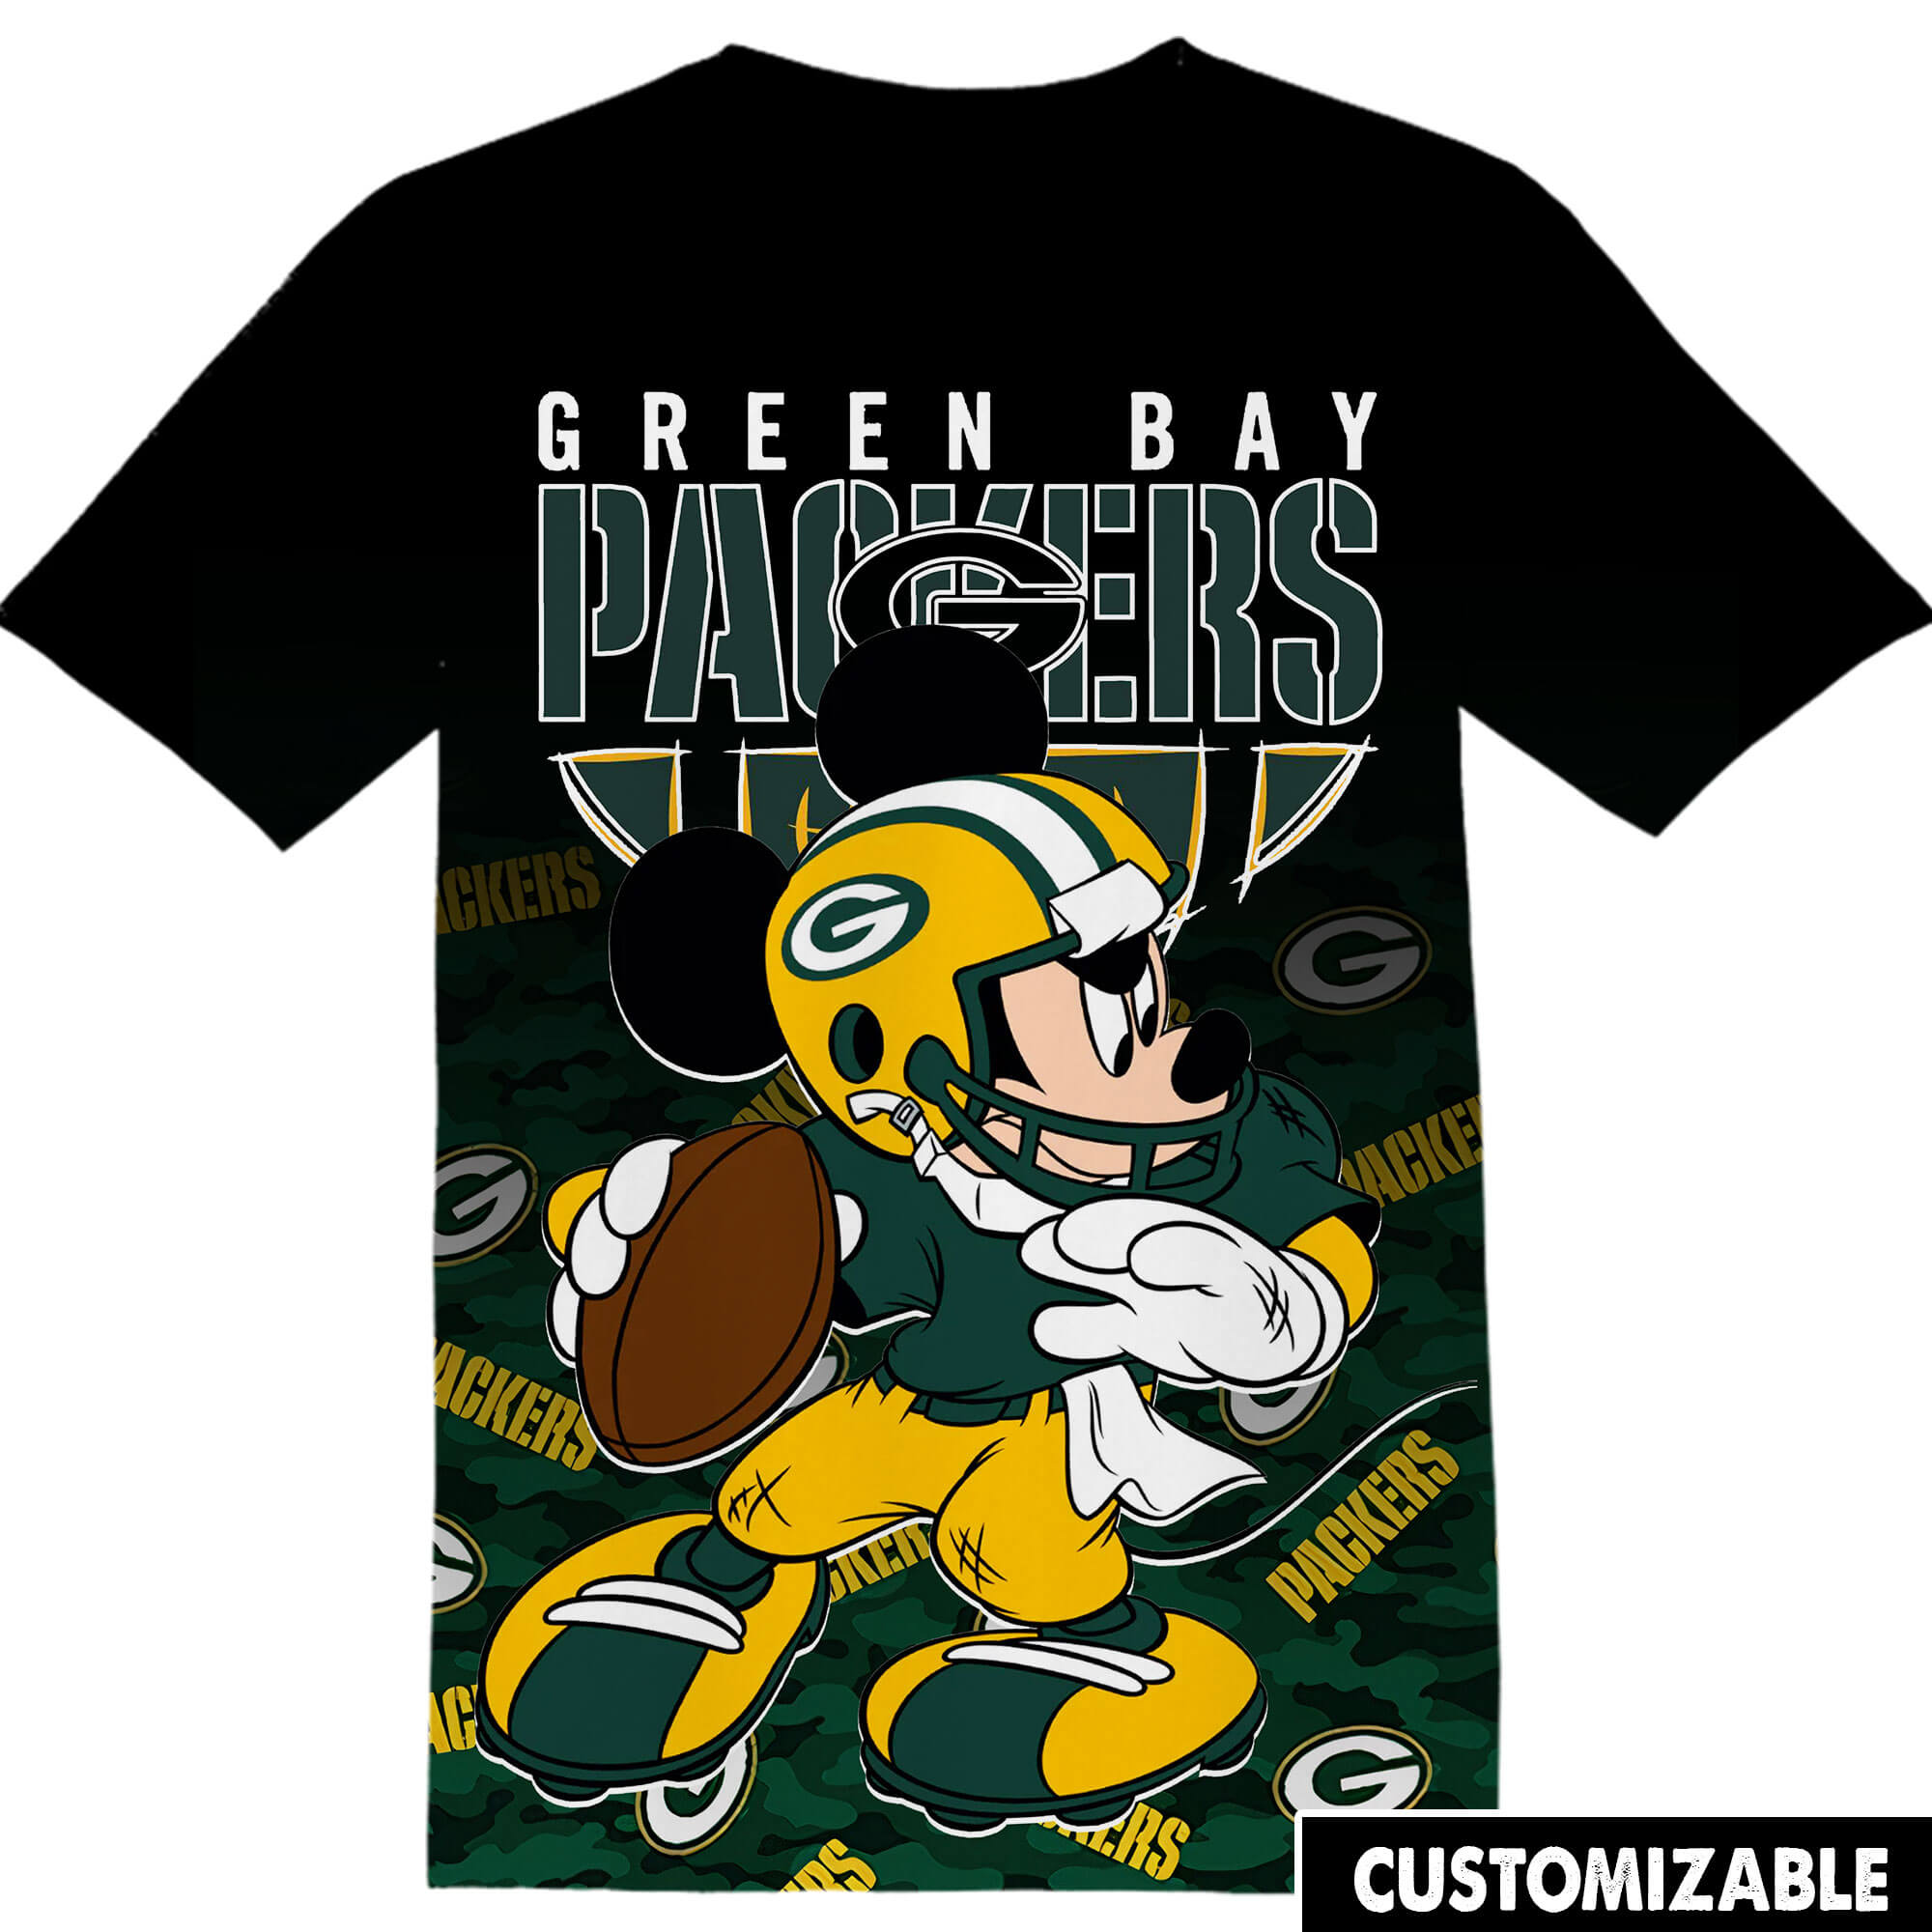 Customized NFL Green Bay Packers Mickey Shirt